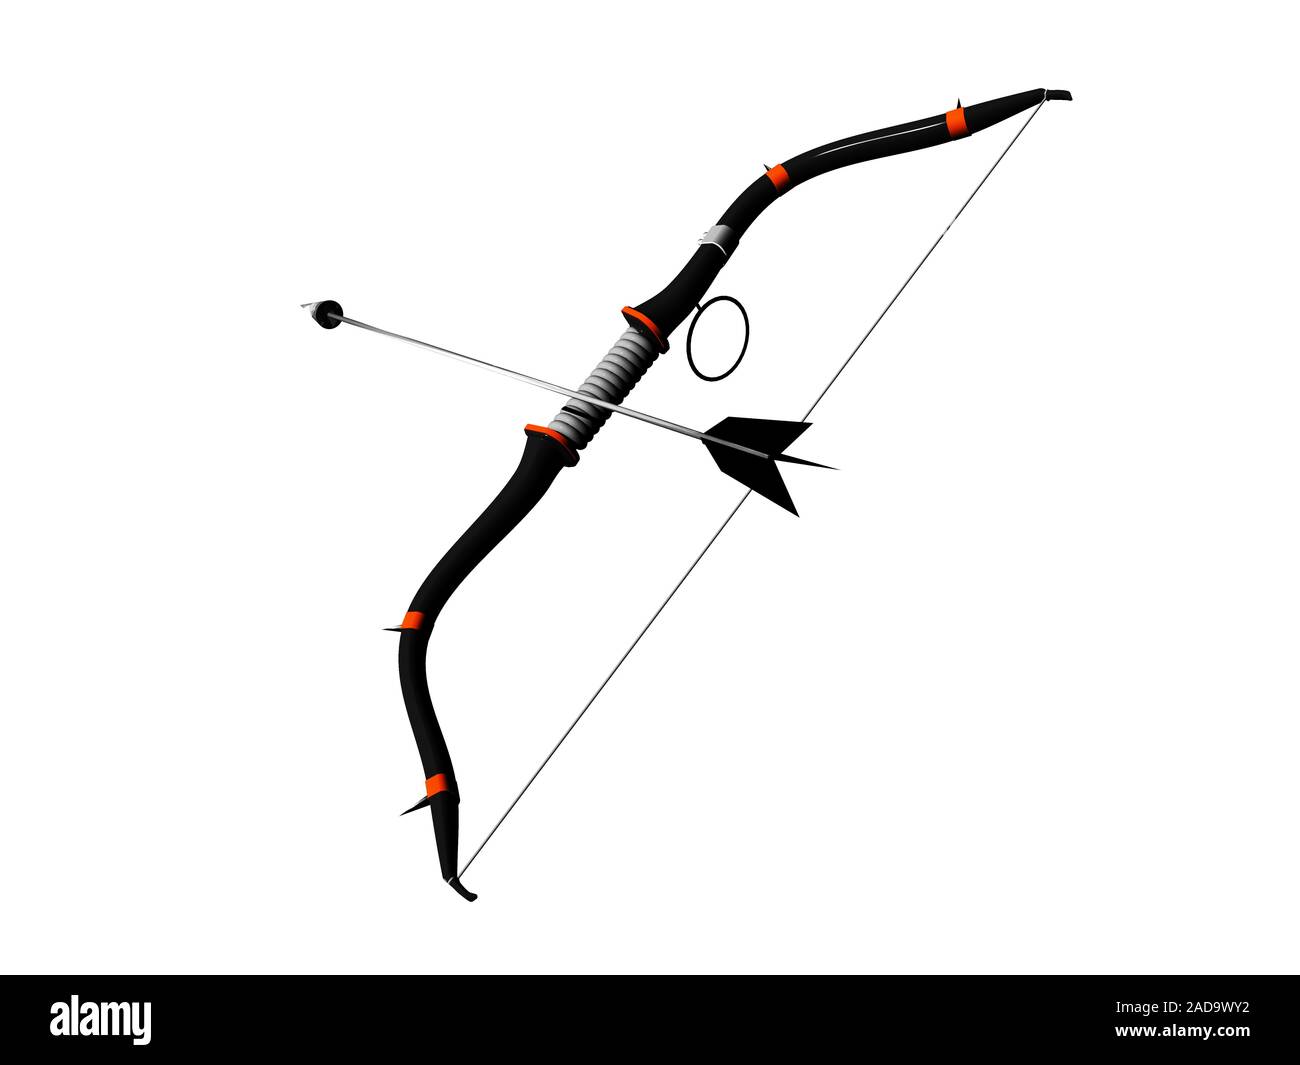 antique bow and arrow Stock Photo